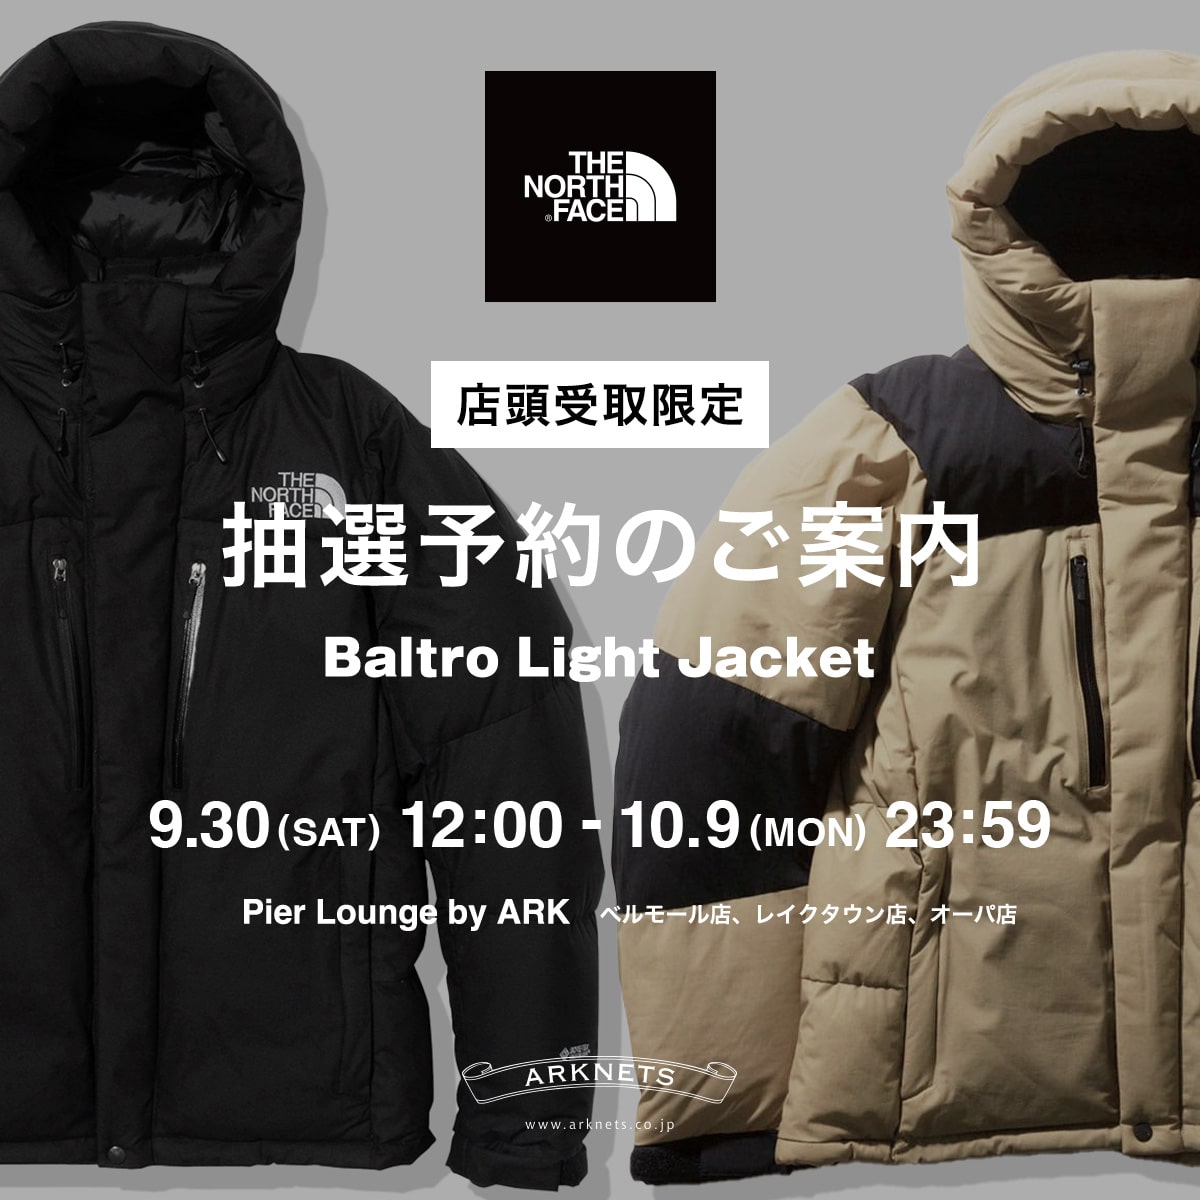 THE NORTH FACE「Baltro Light Jacket」 店頭限定 抽選予約